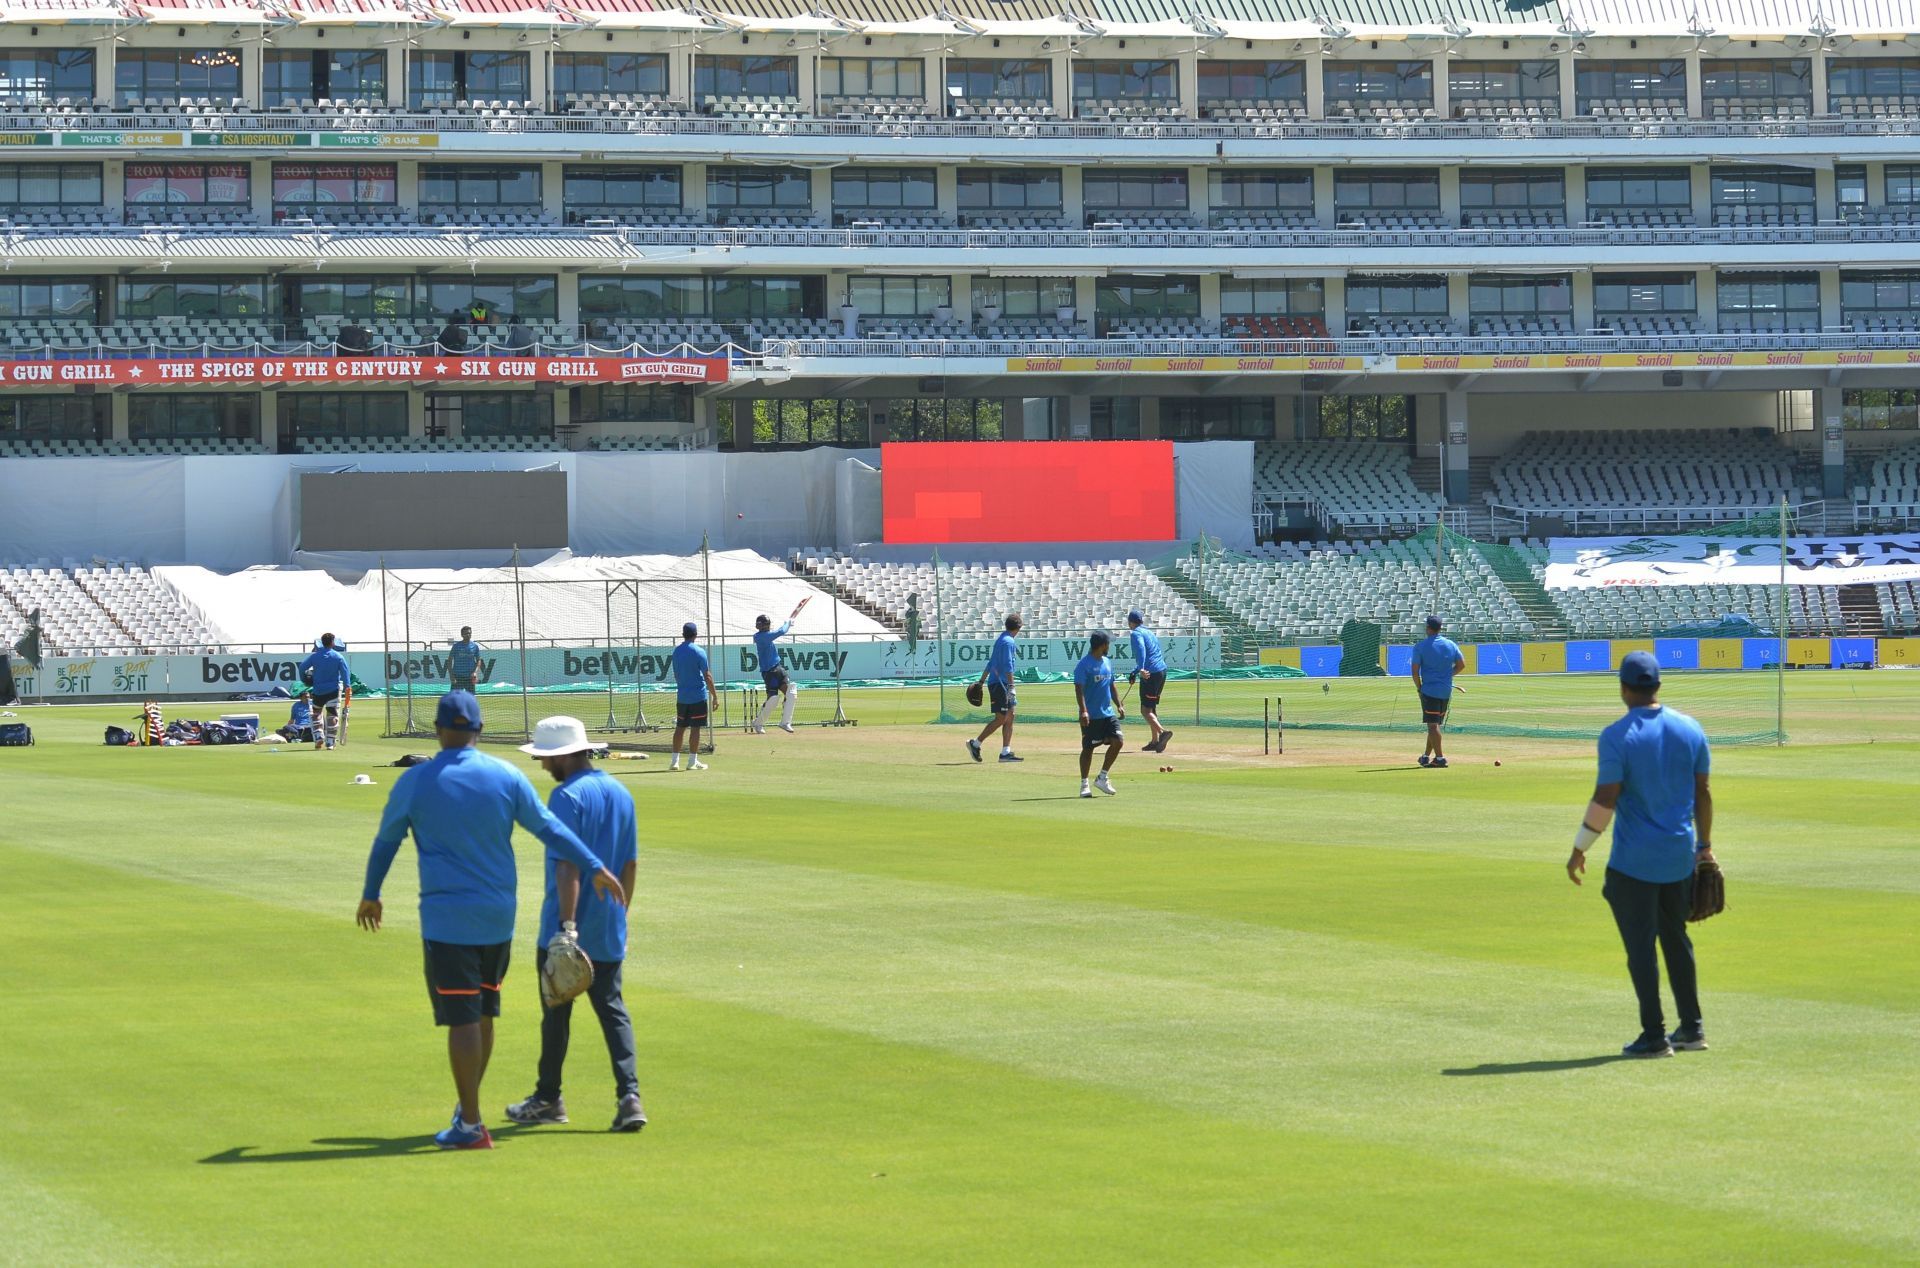 India Tour to South Africa: India Training Session